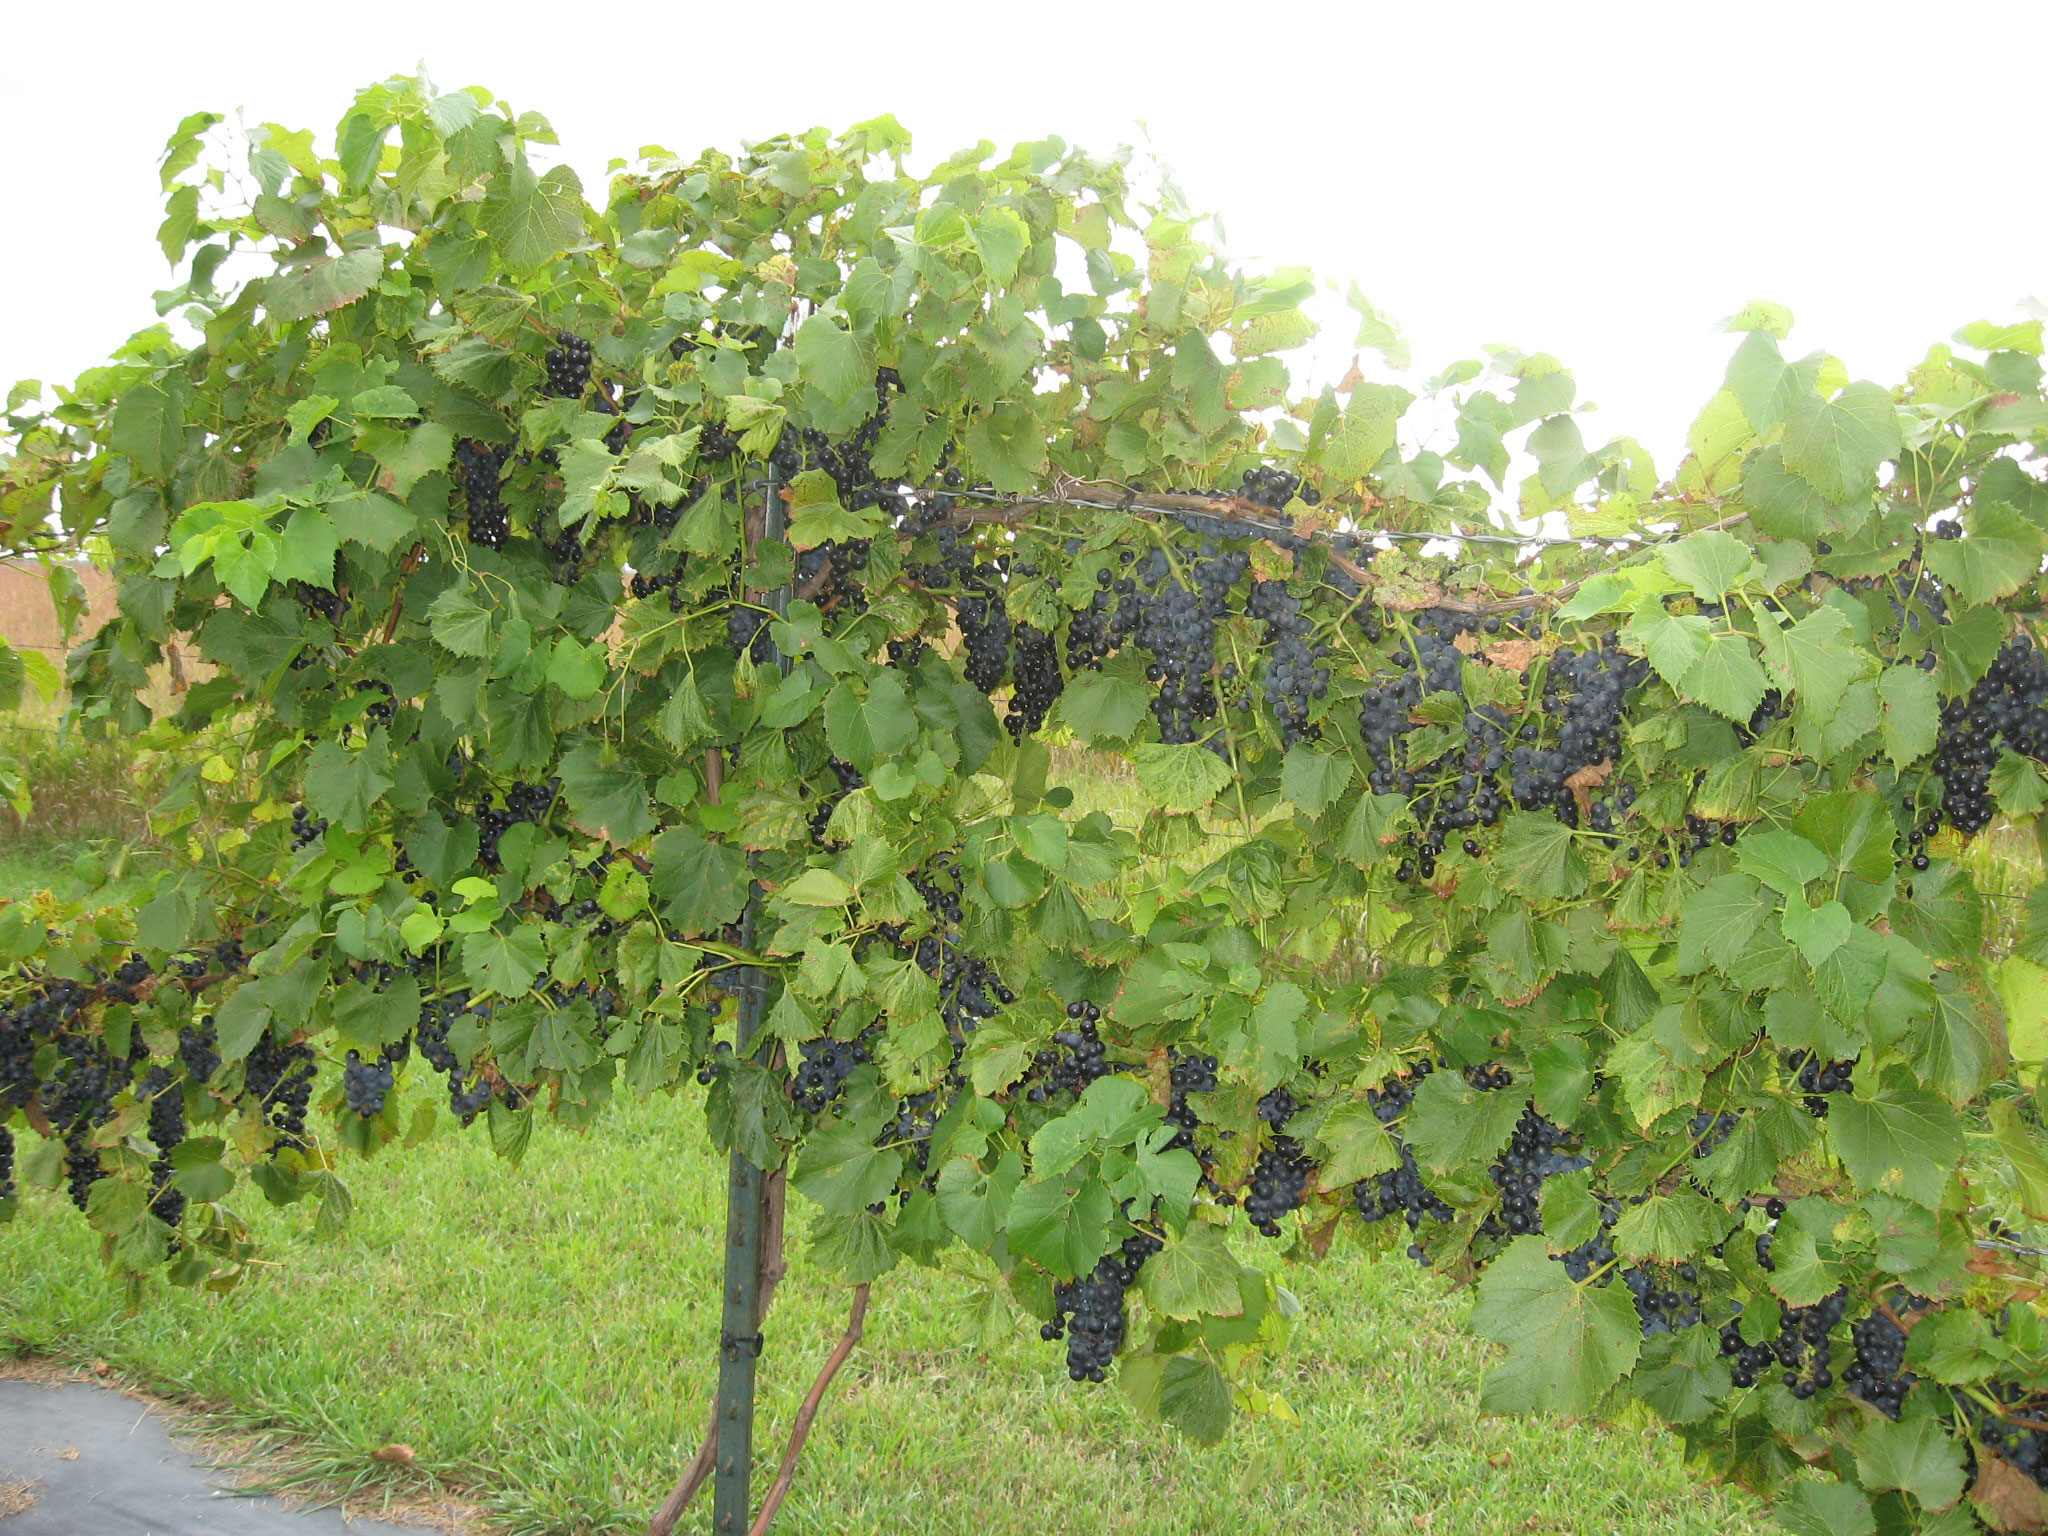 a lush, green grape vine with clusters of dark, purple grapes